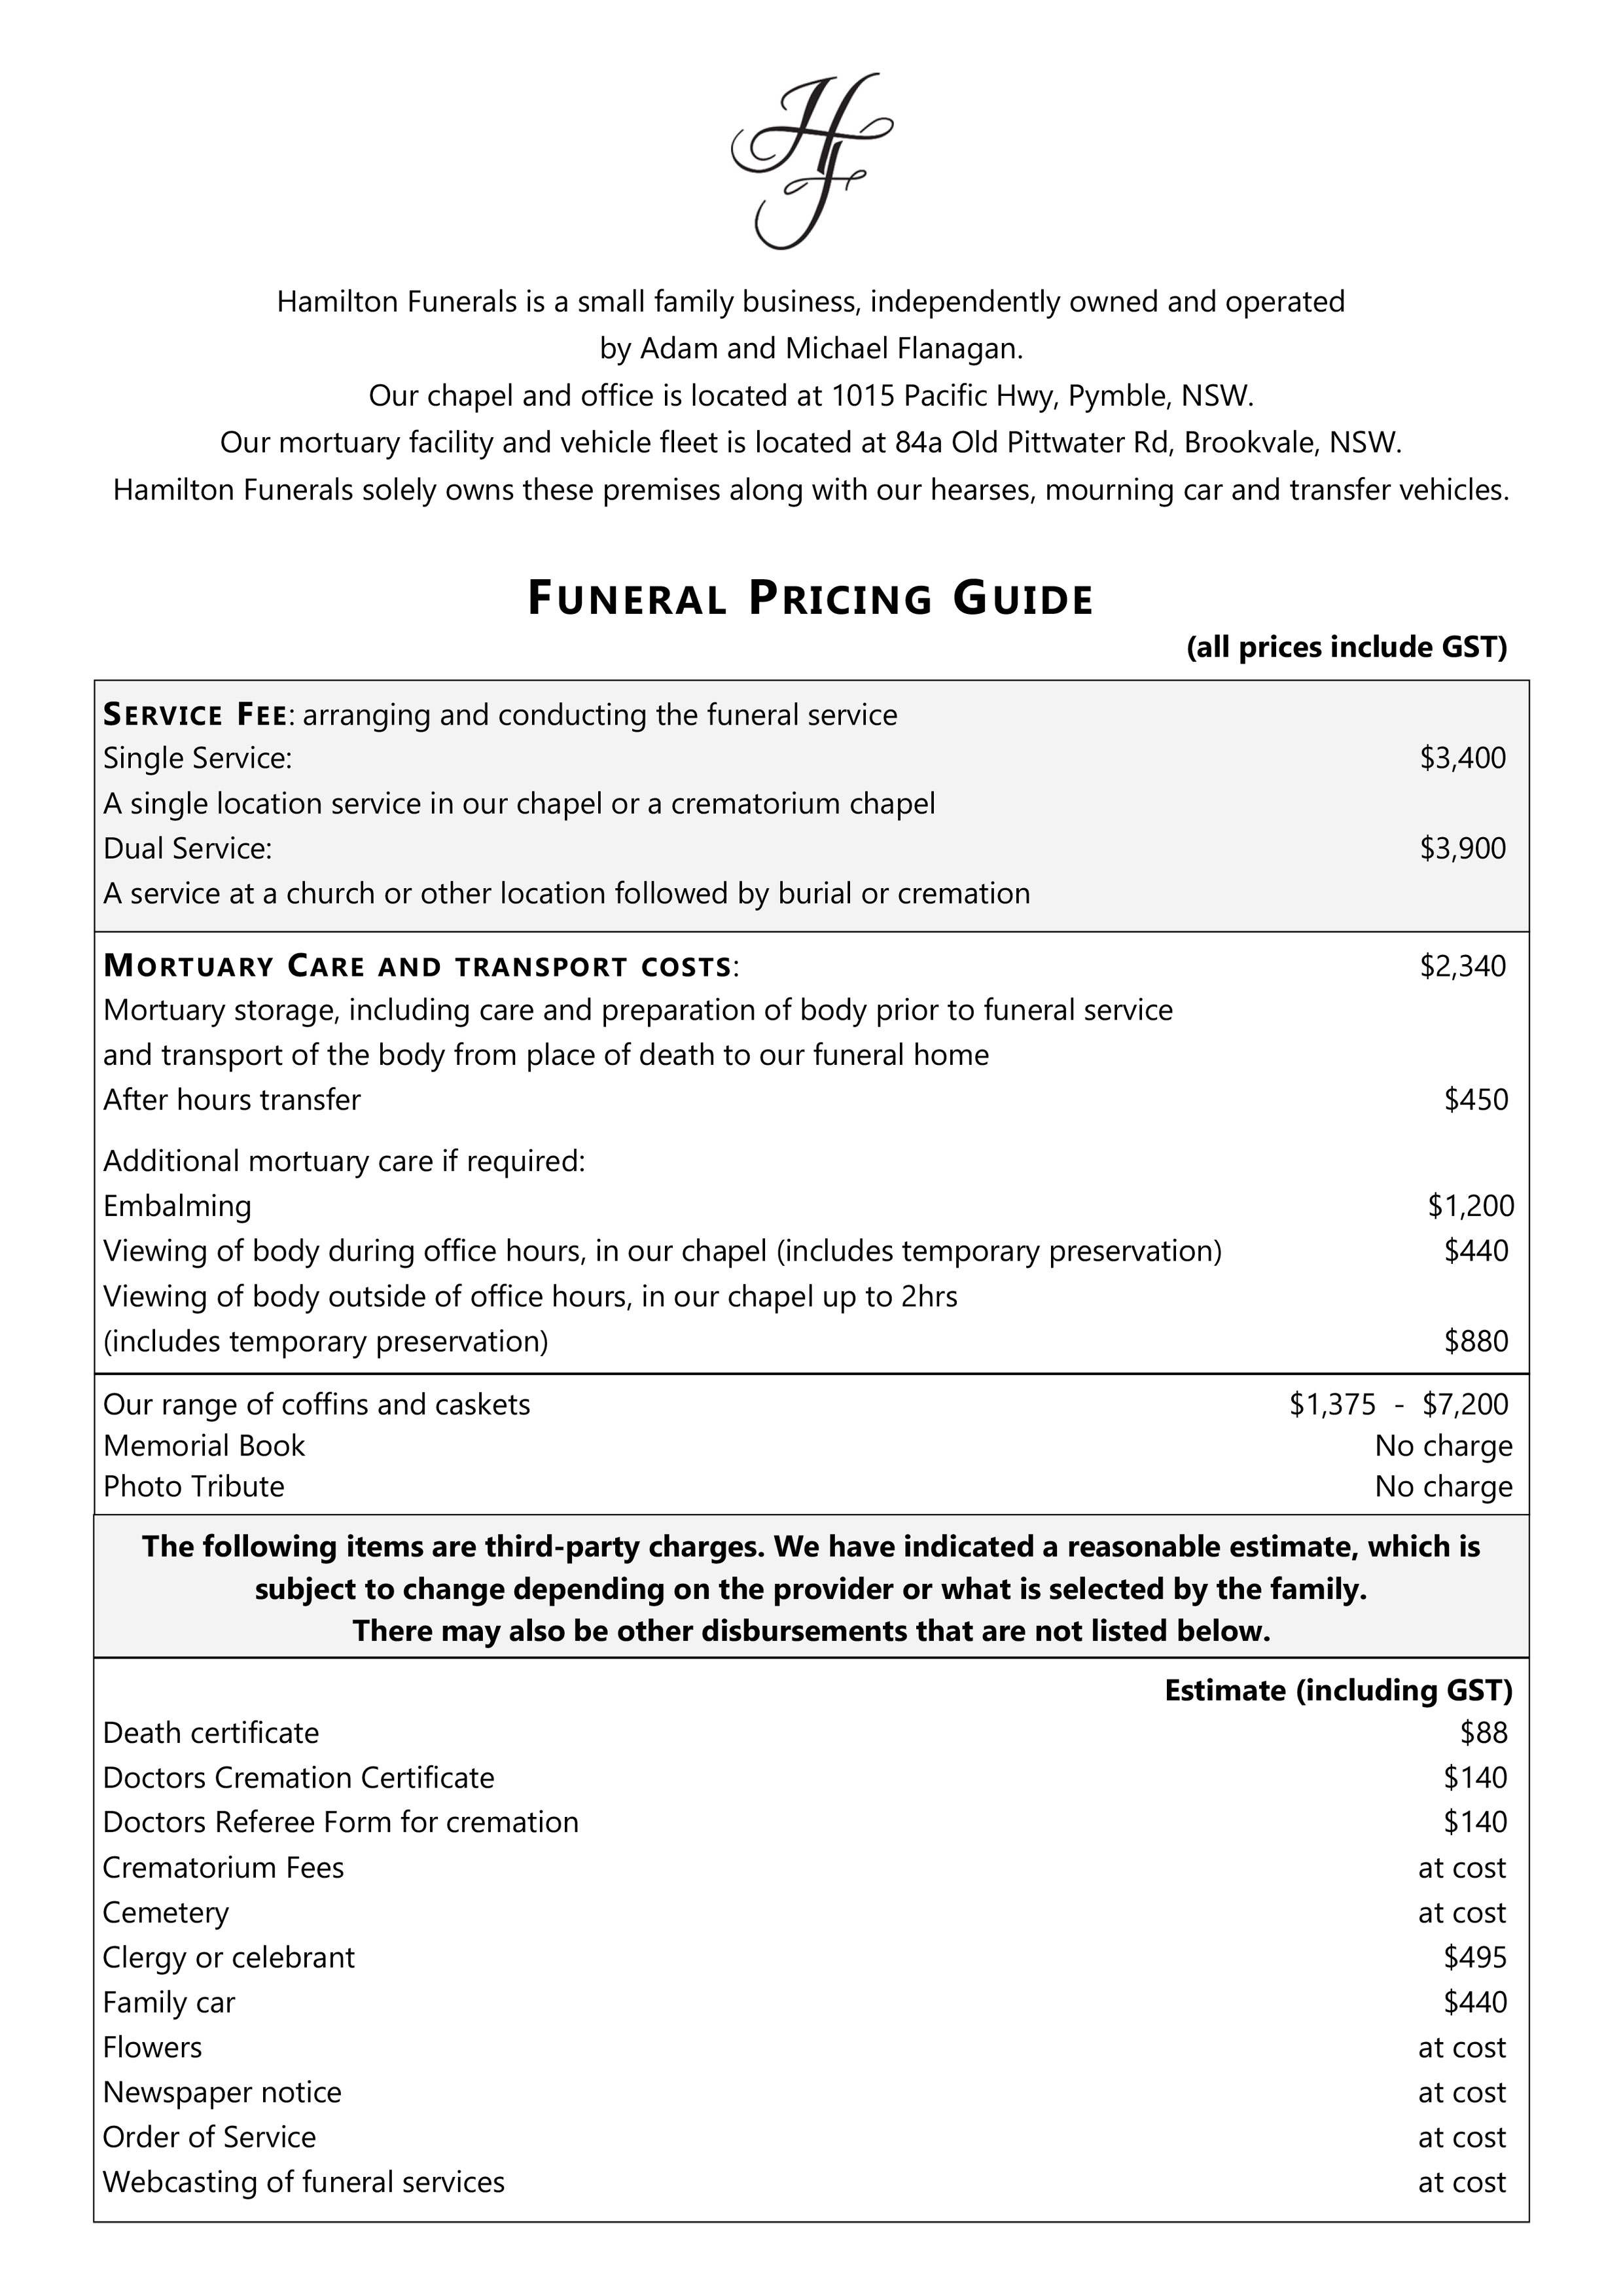 Funeral Pricing Guide